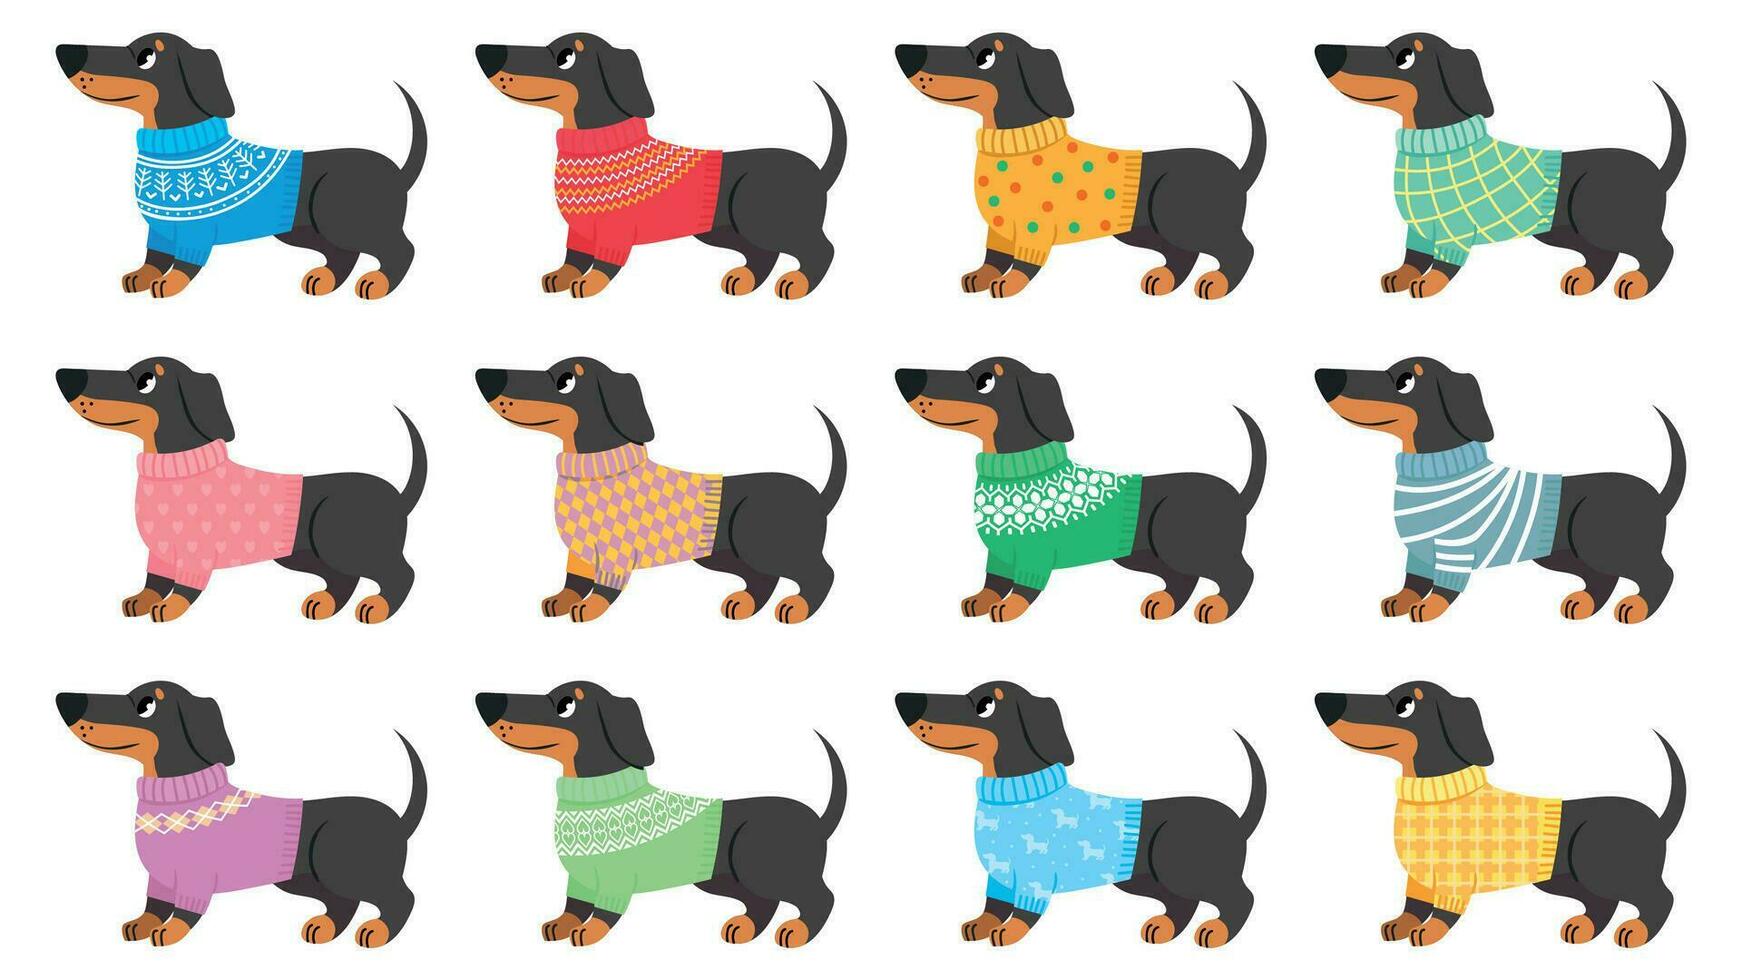 Dachshund clothes. Dogs wear with trendy patterns, puppy in various sweaters. Cute pets, dachshunds fashion cartoon vector set